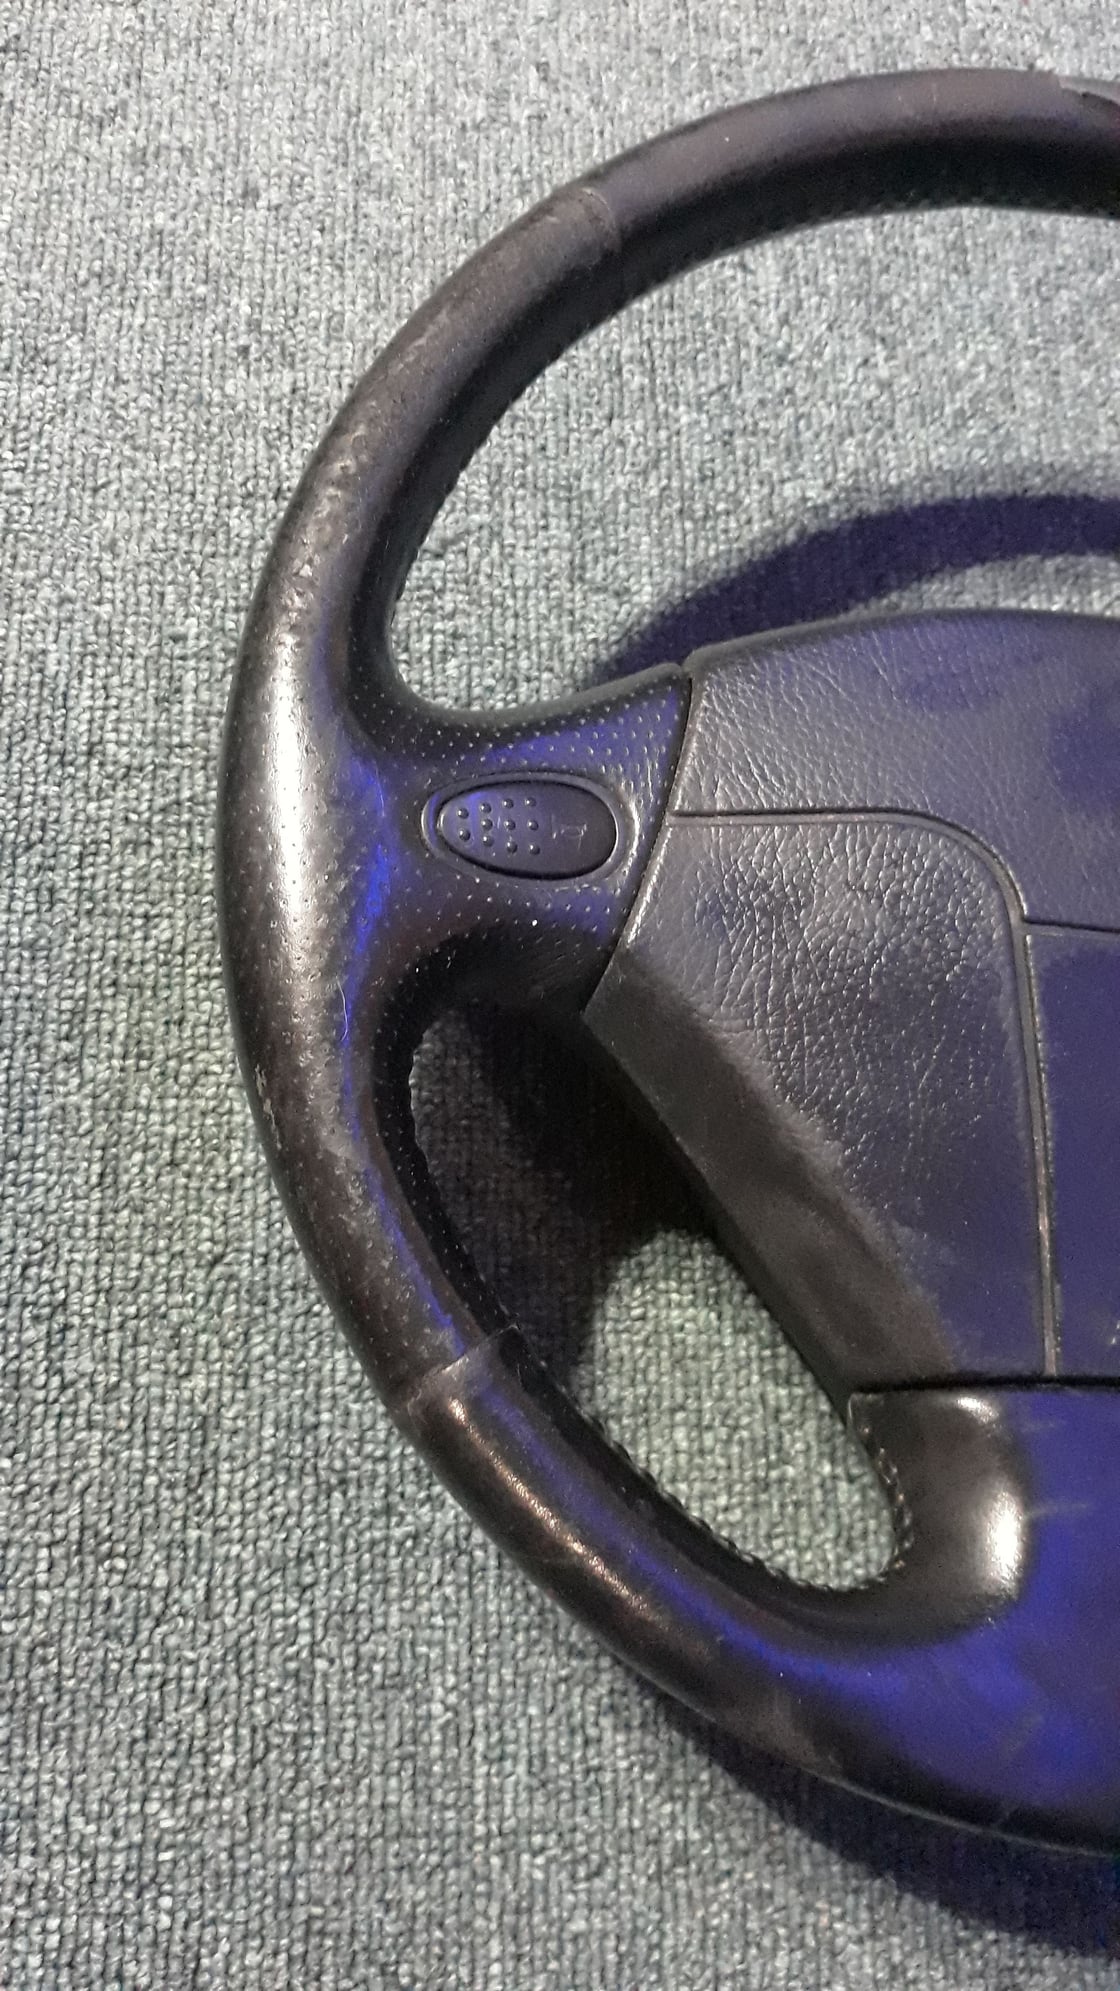 Interior/Upholstery - OEM Steering wheel with airbag and controls - Used - Orlando, FL 32824, United States